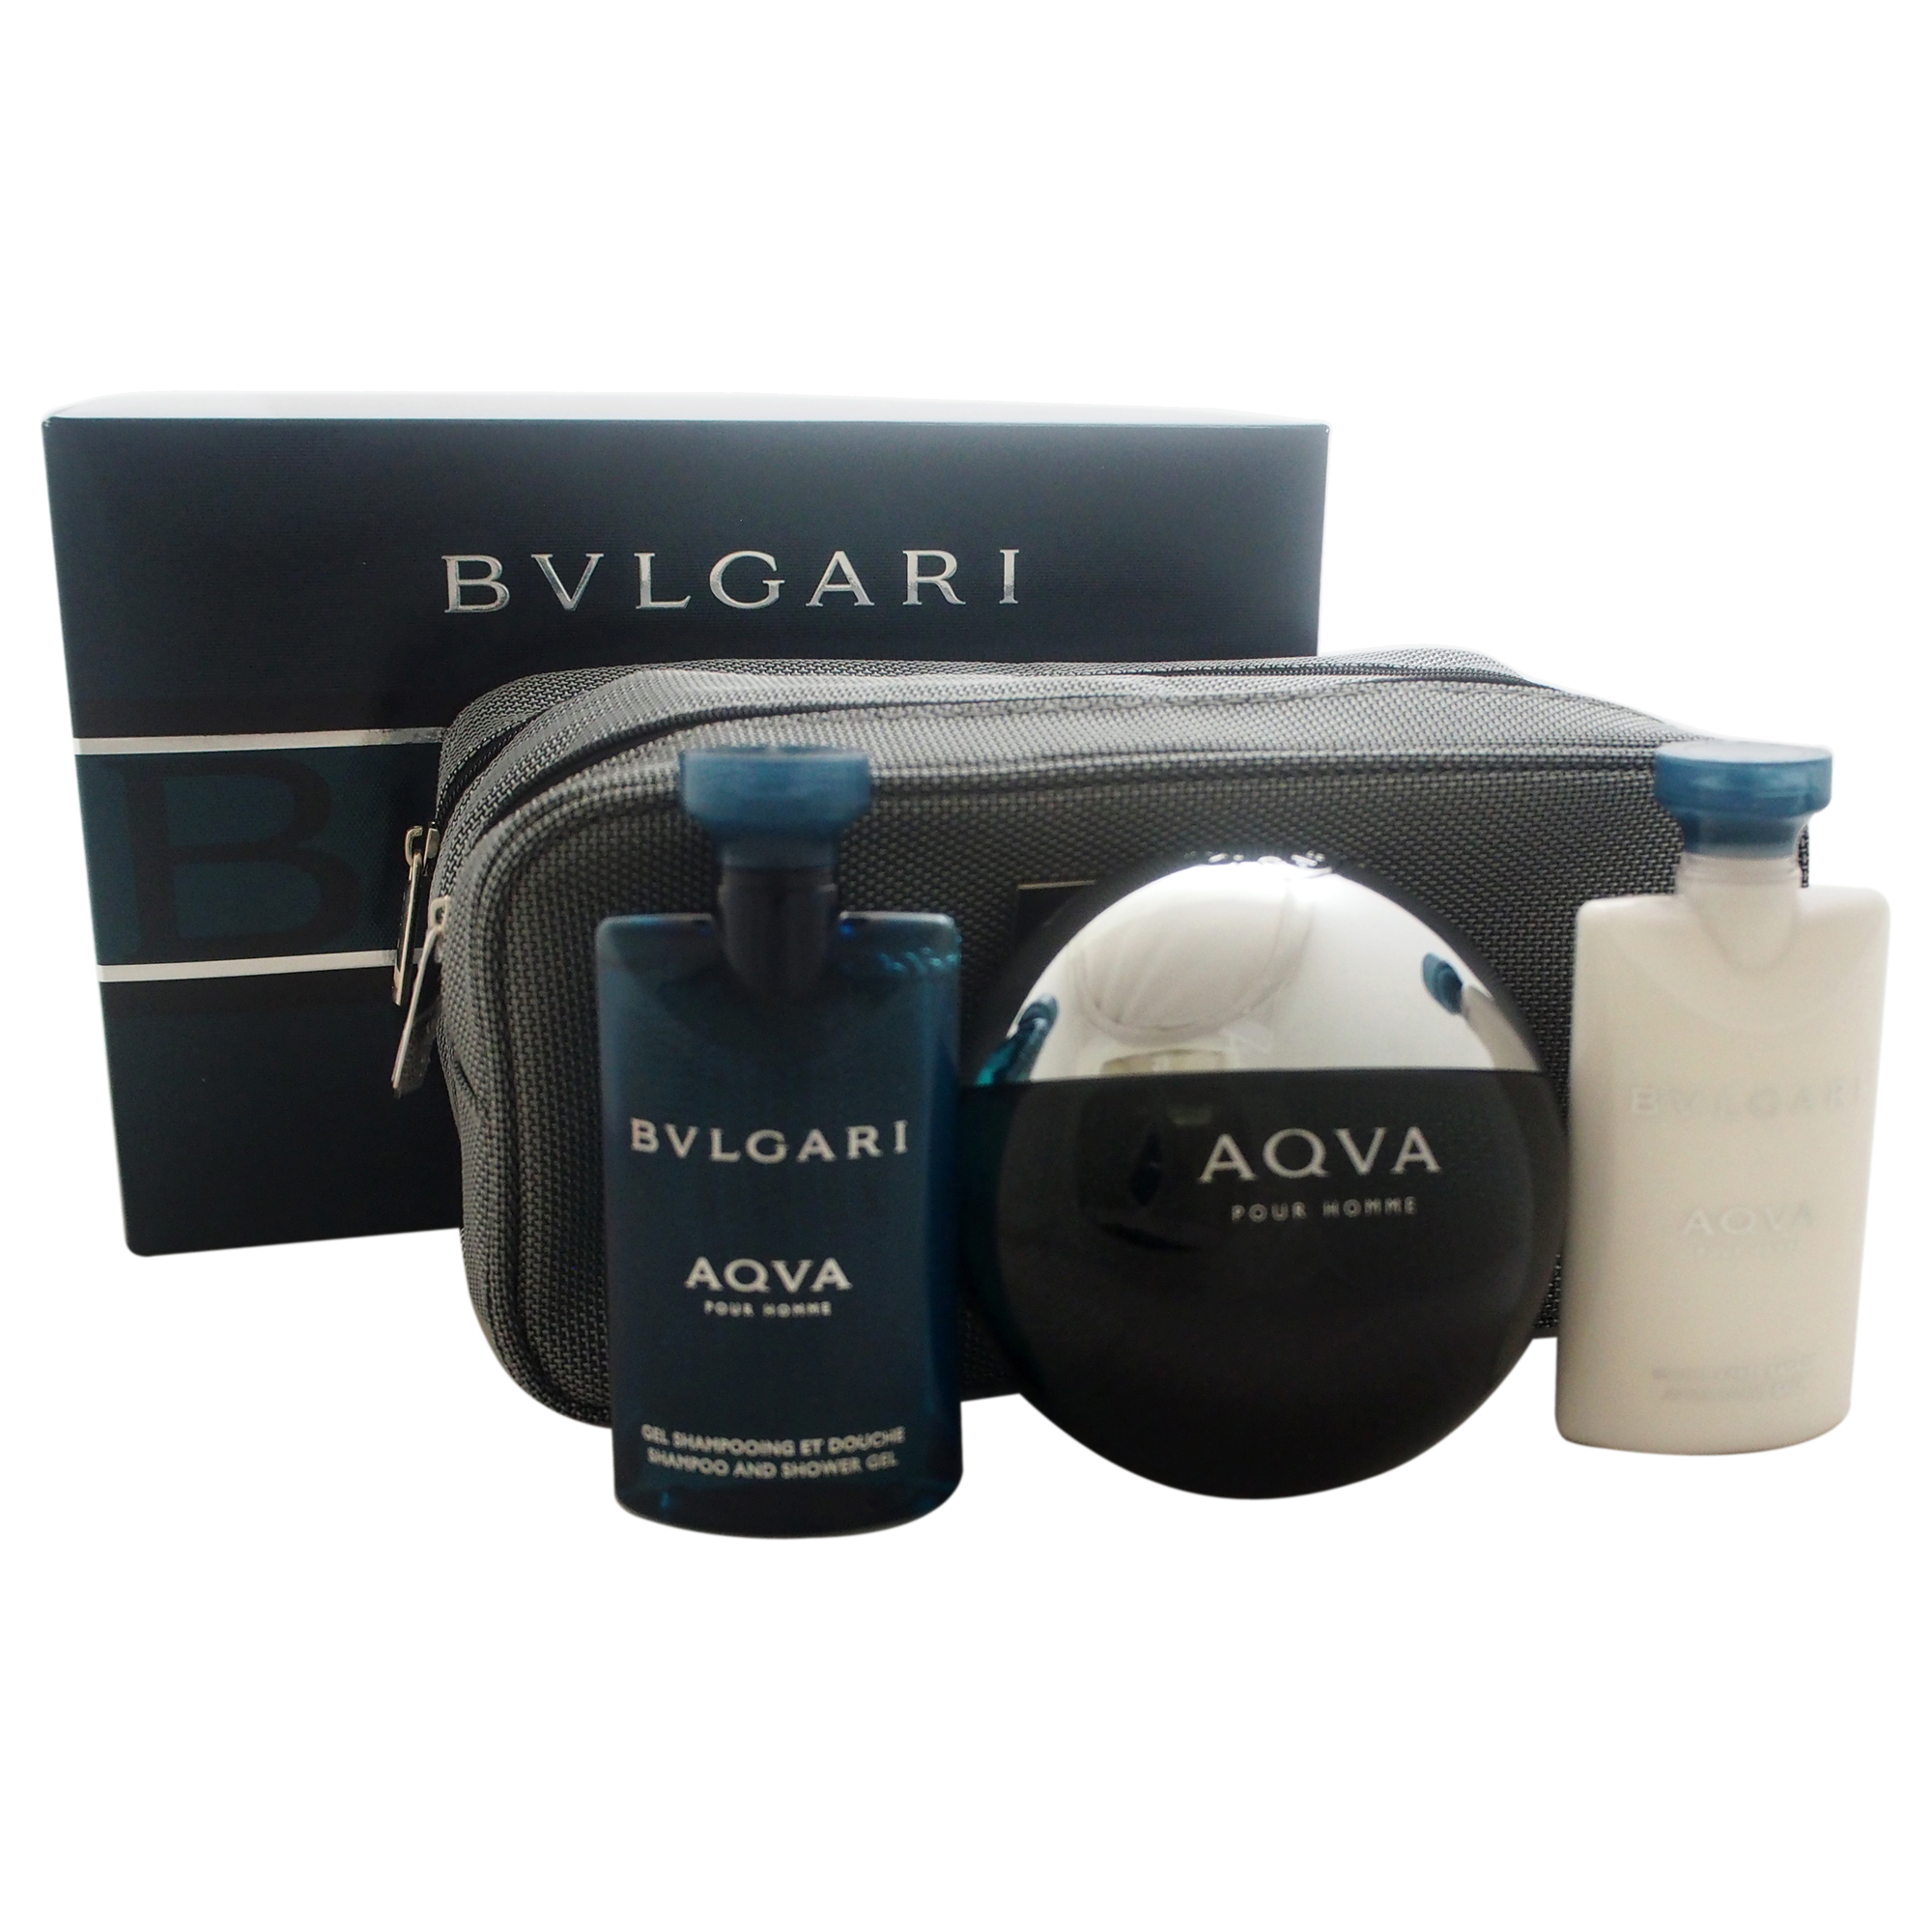 Bvlgari Aqva by  for Men - 4 Pc Gift Set 3.4oz EDT Spray, 2.5oz After Shave Balm, 2.5oz Shampoo & Shower Gel, Pouch